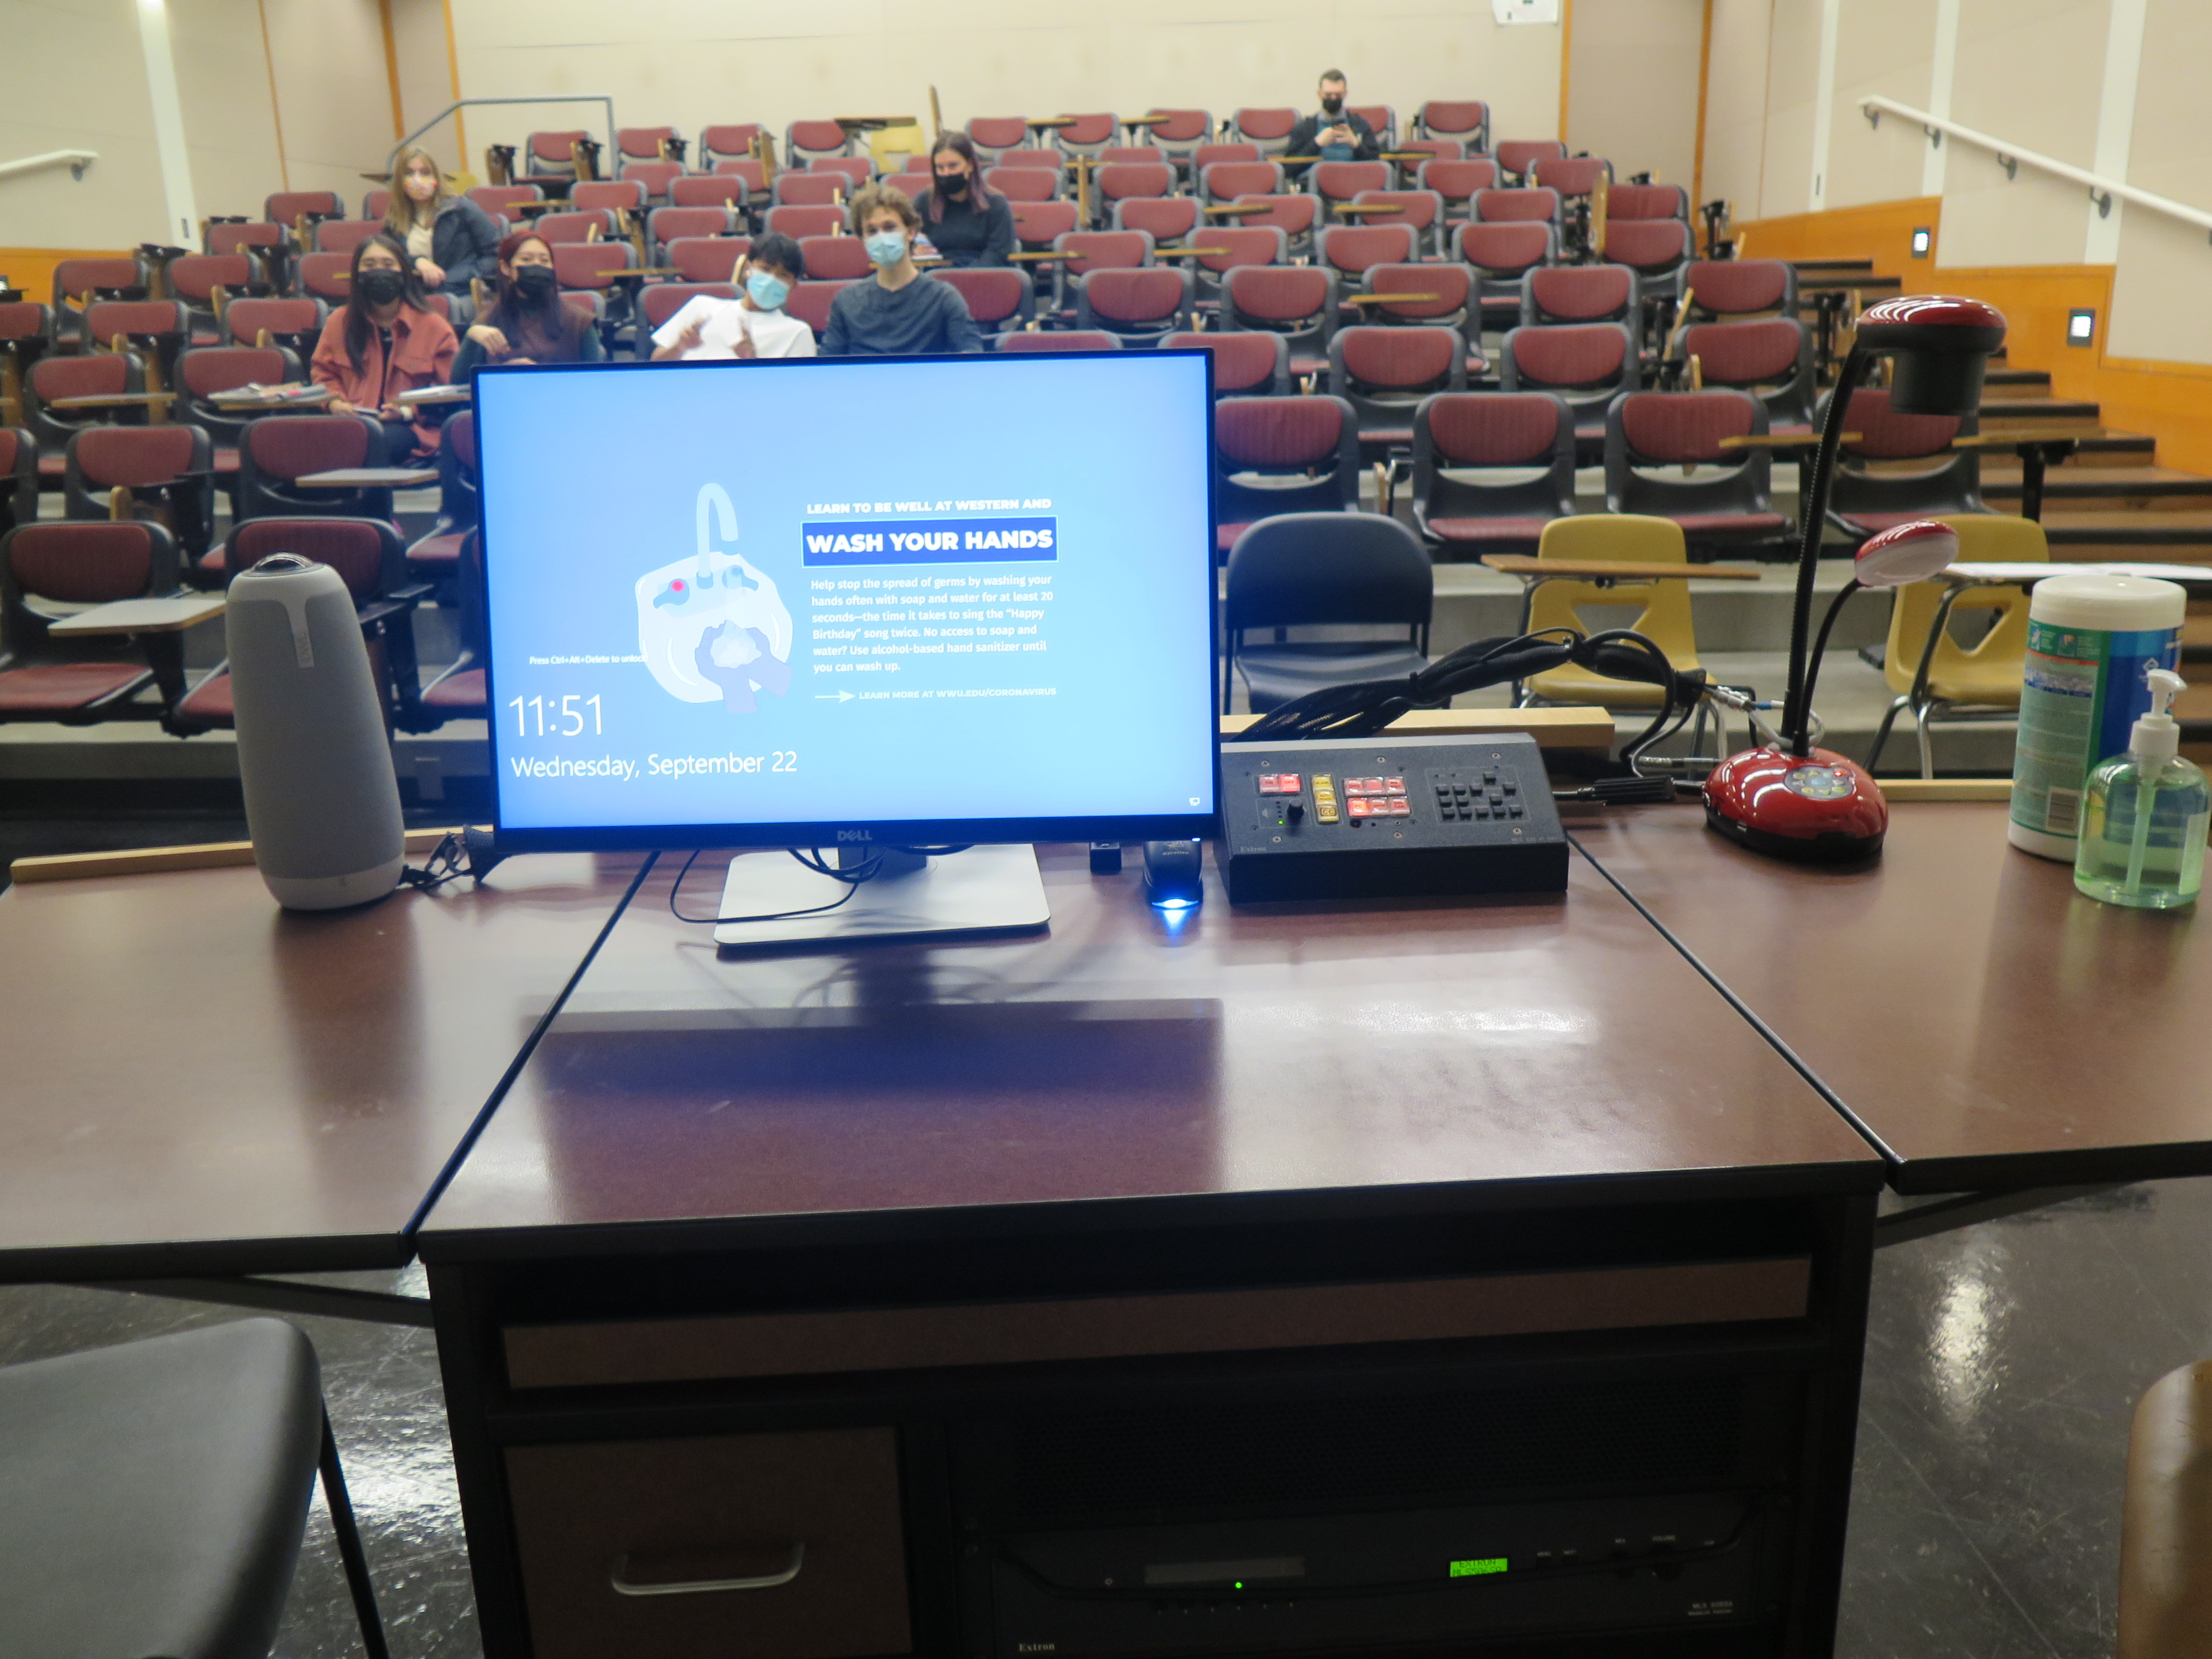 On top of Podium is Owl webcam, Dell Computer Monitor, AV Push Button Controller, and a Lumens Ladybug Document Camera.